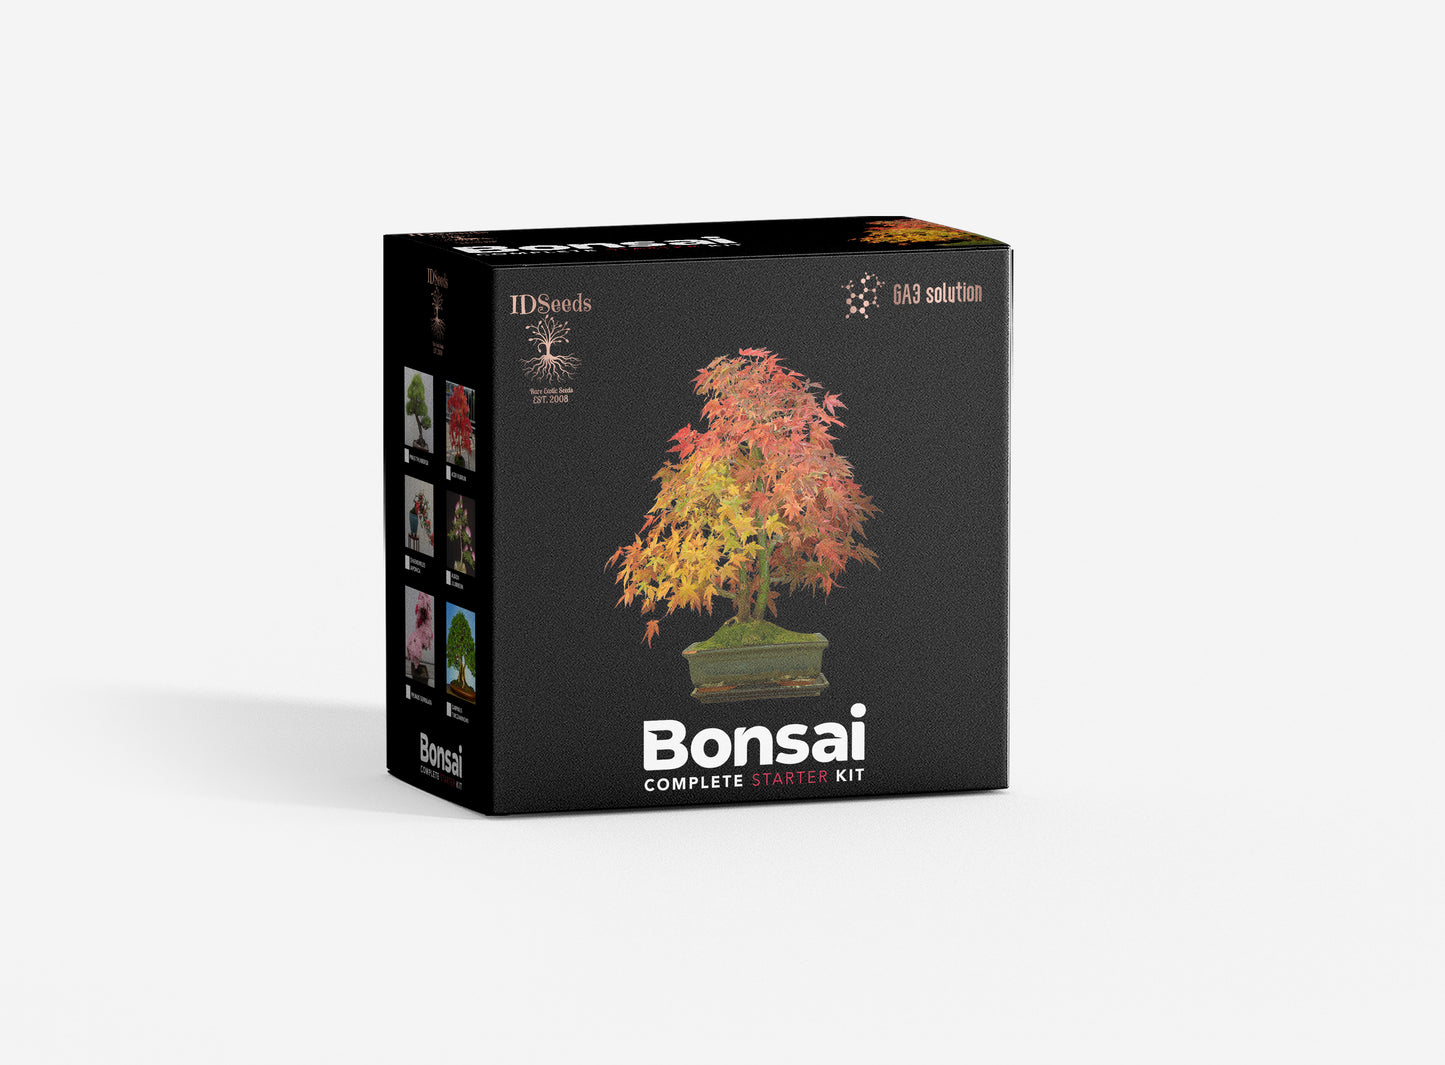 Bonsai Full Kit with 6 Types of seeds